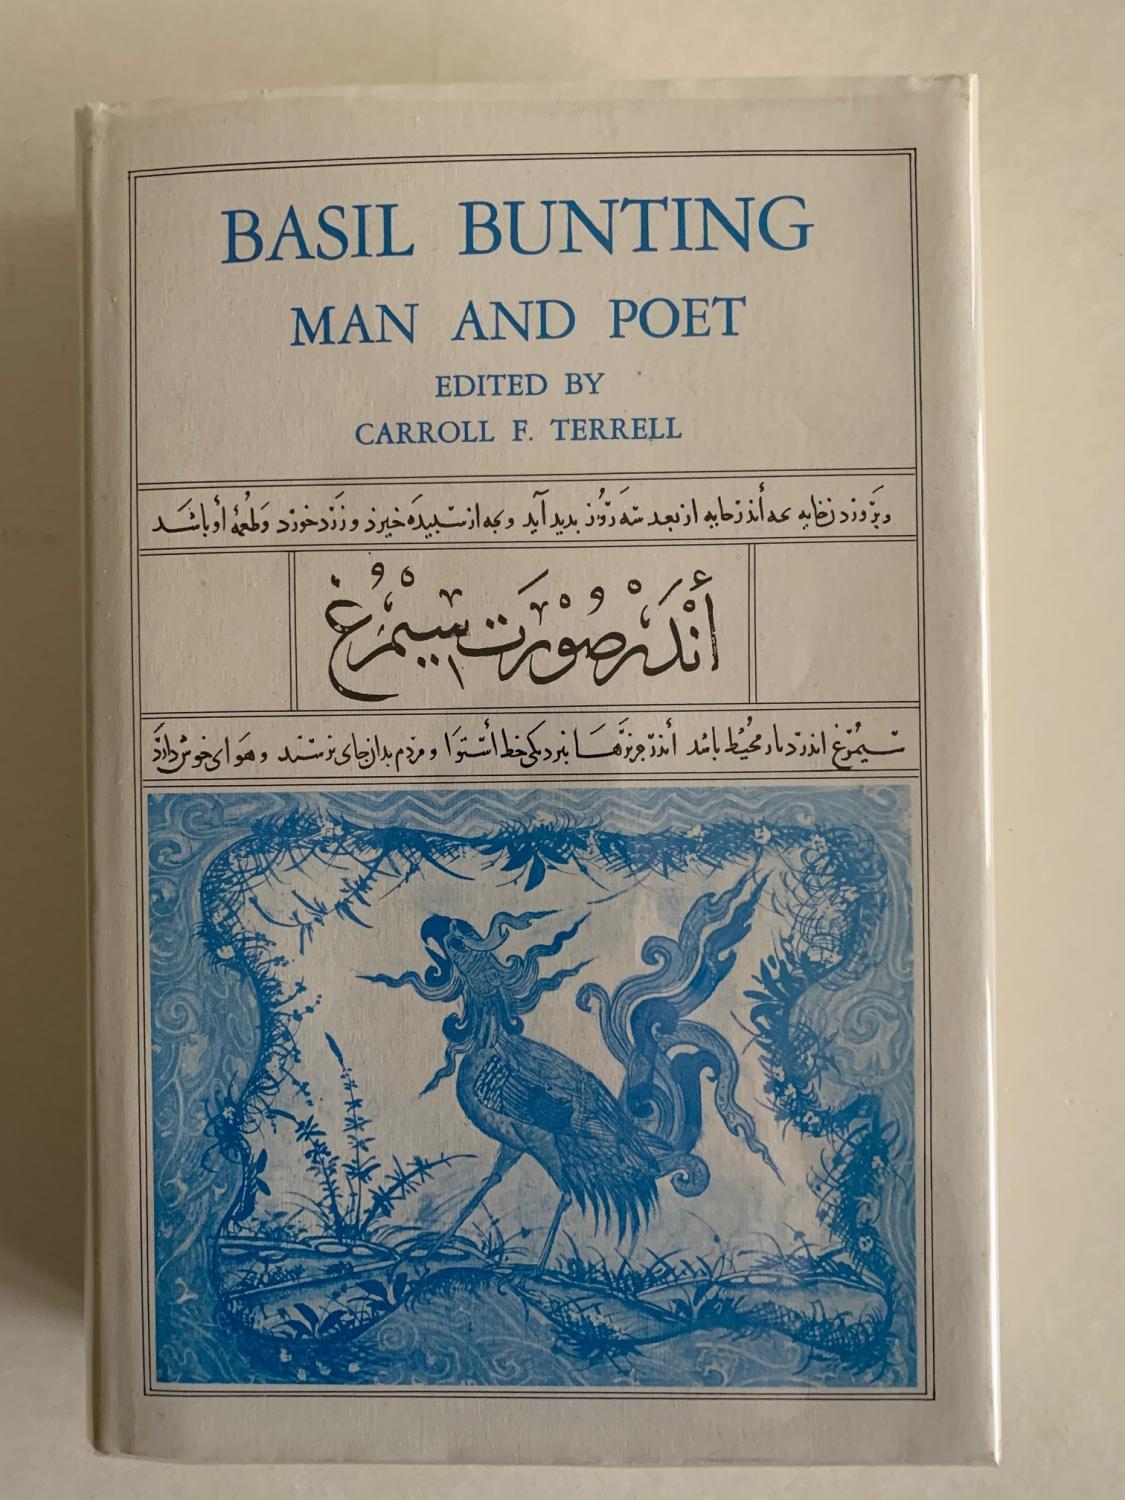 Basil Bunting: Man and Poet - Terrell, Carroll F. (edited with an introduction)